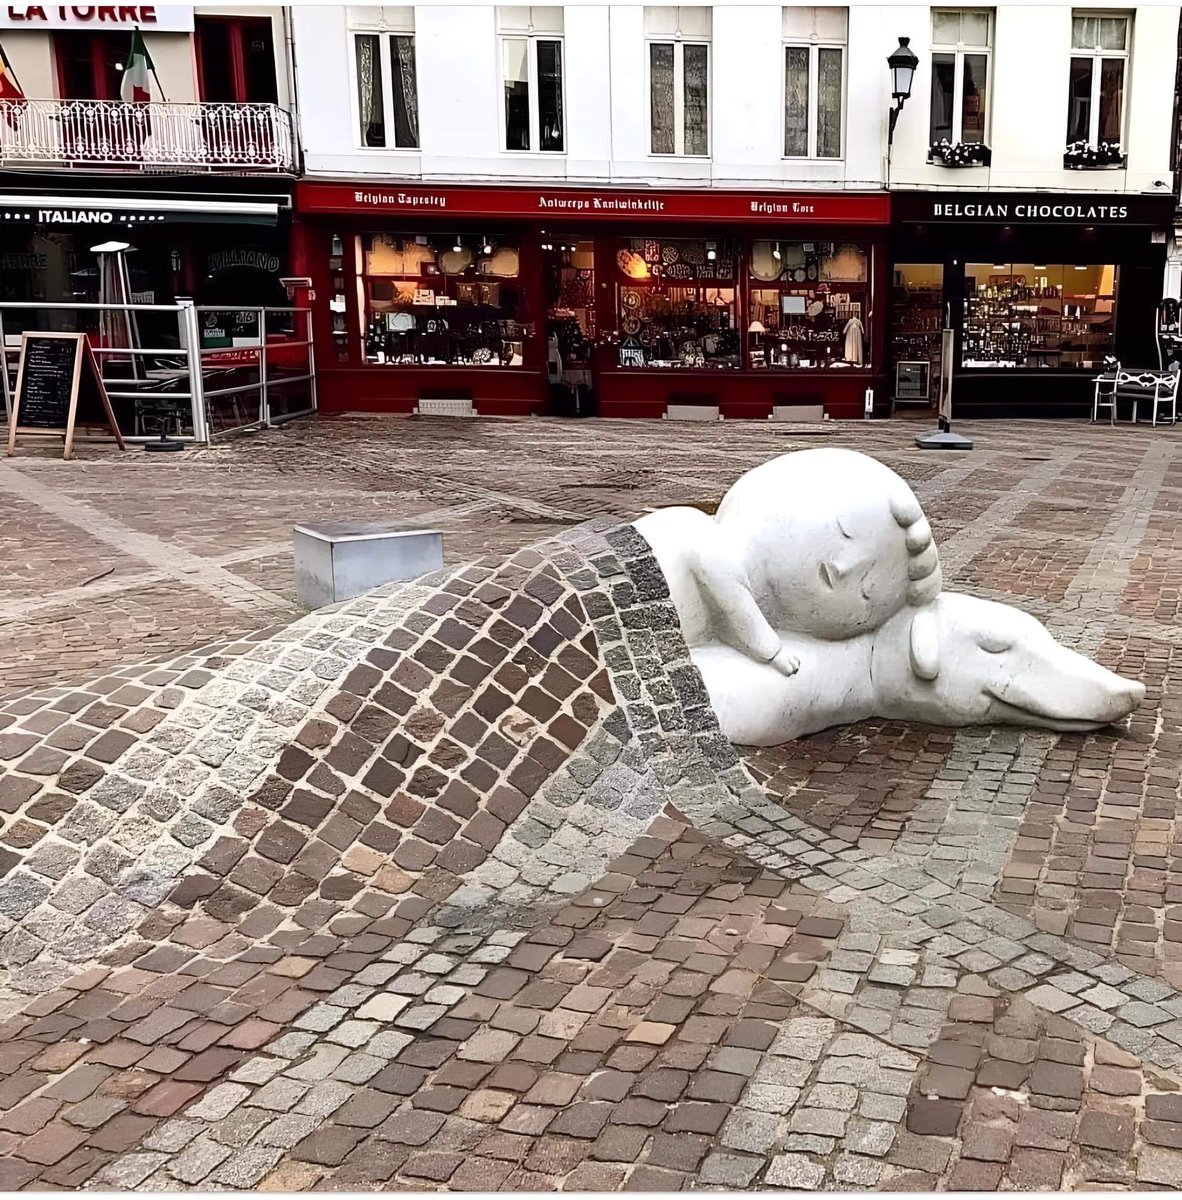 White marble sculpture of Sleeping Nello and Patrasche (Dog of Flanders), covered by a blanket of cobblestones, in front of the Cathedral of Our Lady, Antwerp, Belgium 🇧🇪 Beautiful 😍 ❤️